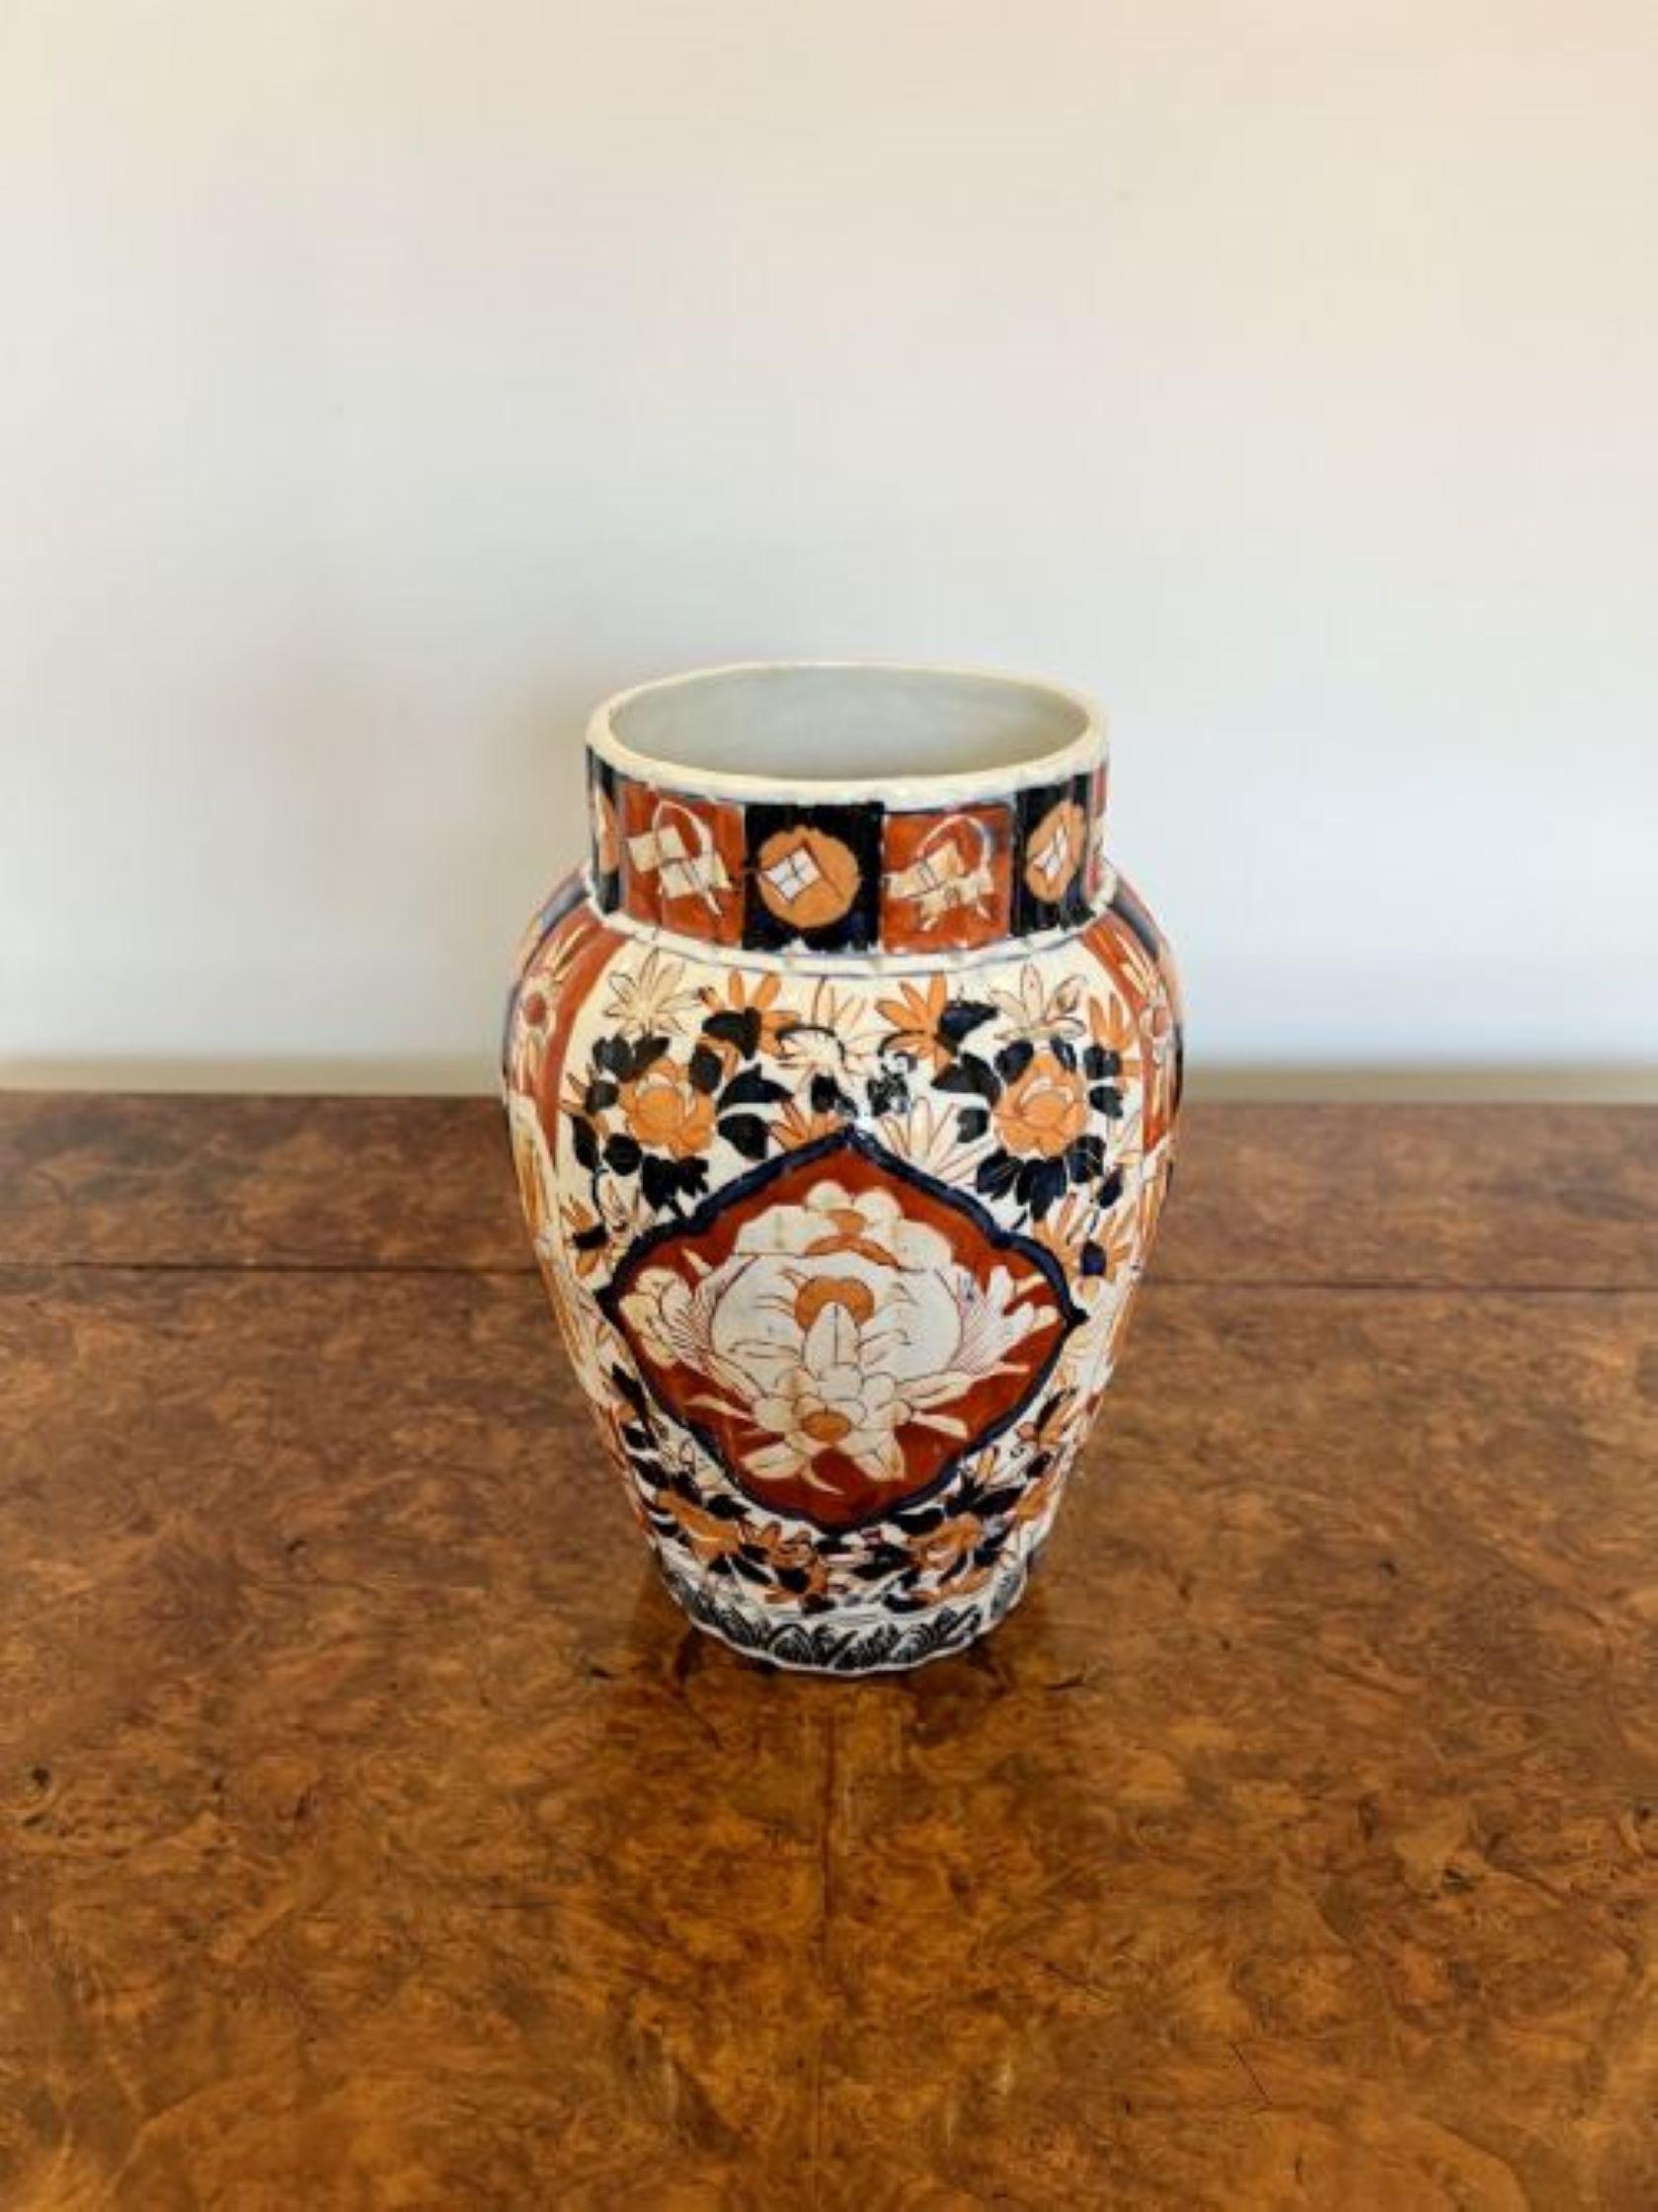 Quality antique Japanese Imari shaped vase, having a quality Japanese Imari vase hand painted in wonderful red, blue, orange and white colours decorated with flowers and leaves.
